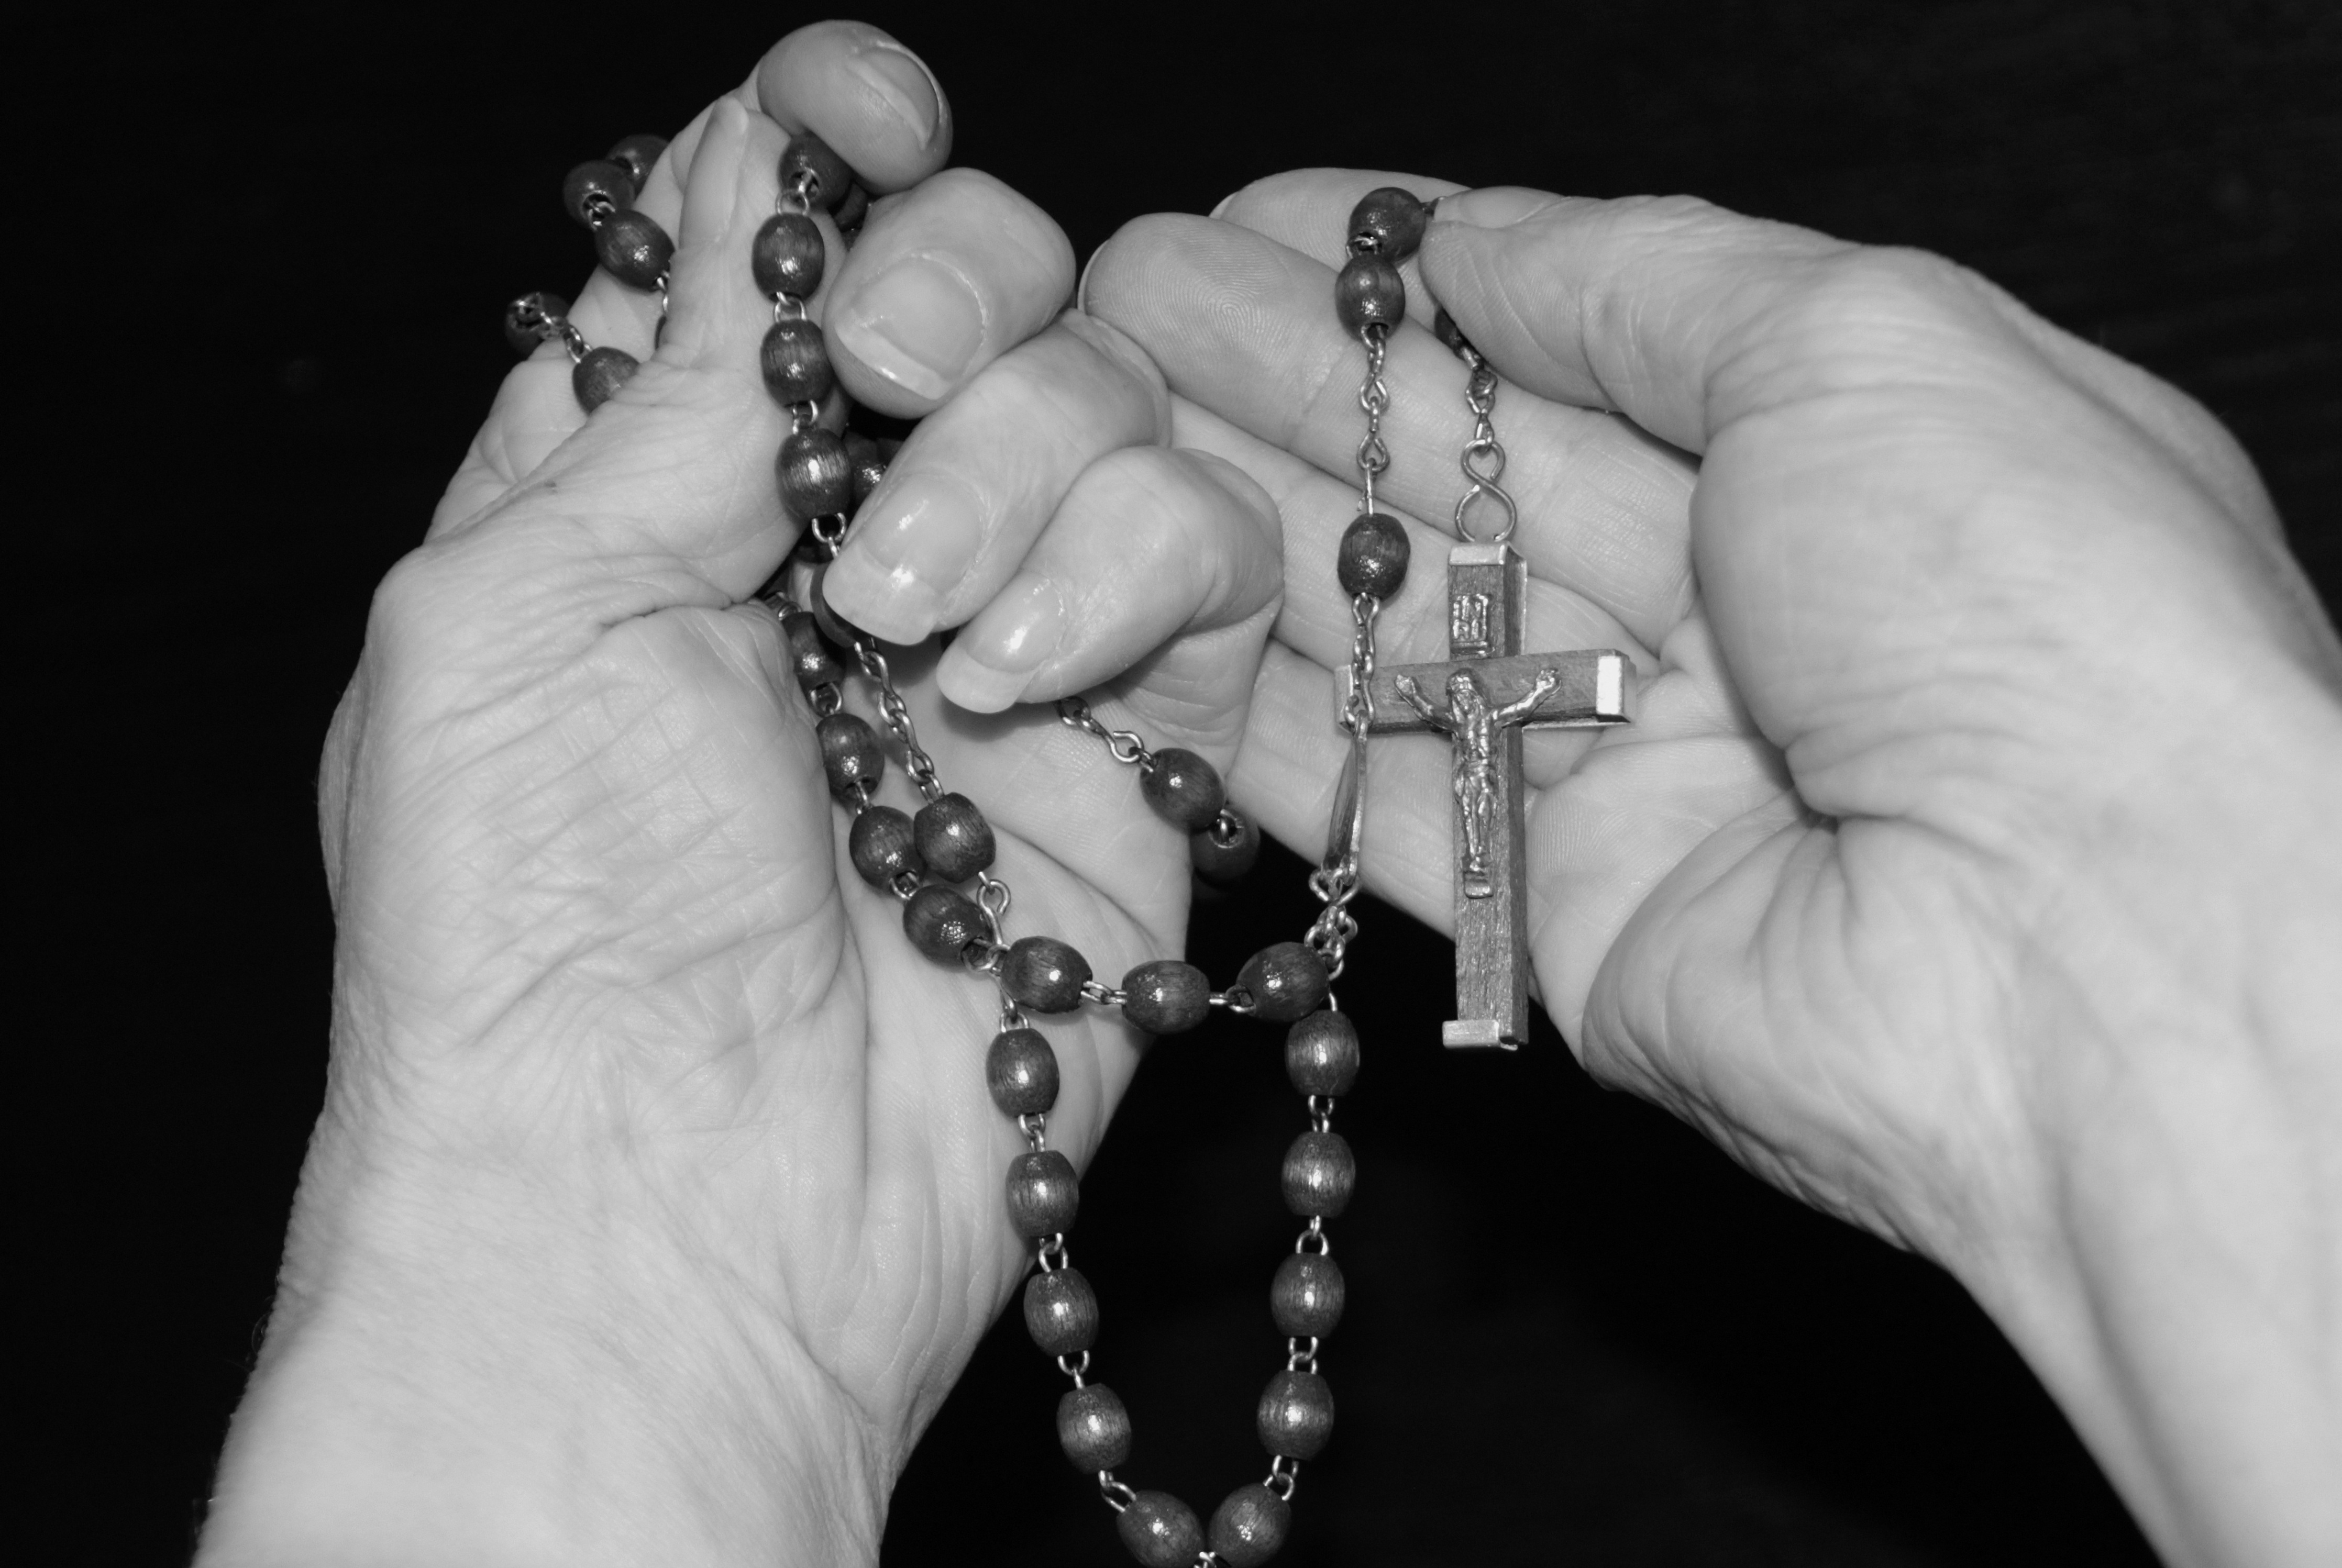 Holding a cross on string of beads - black & white photo